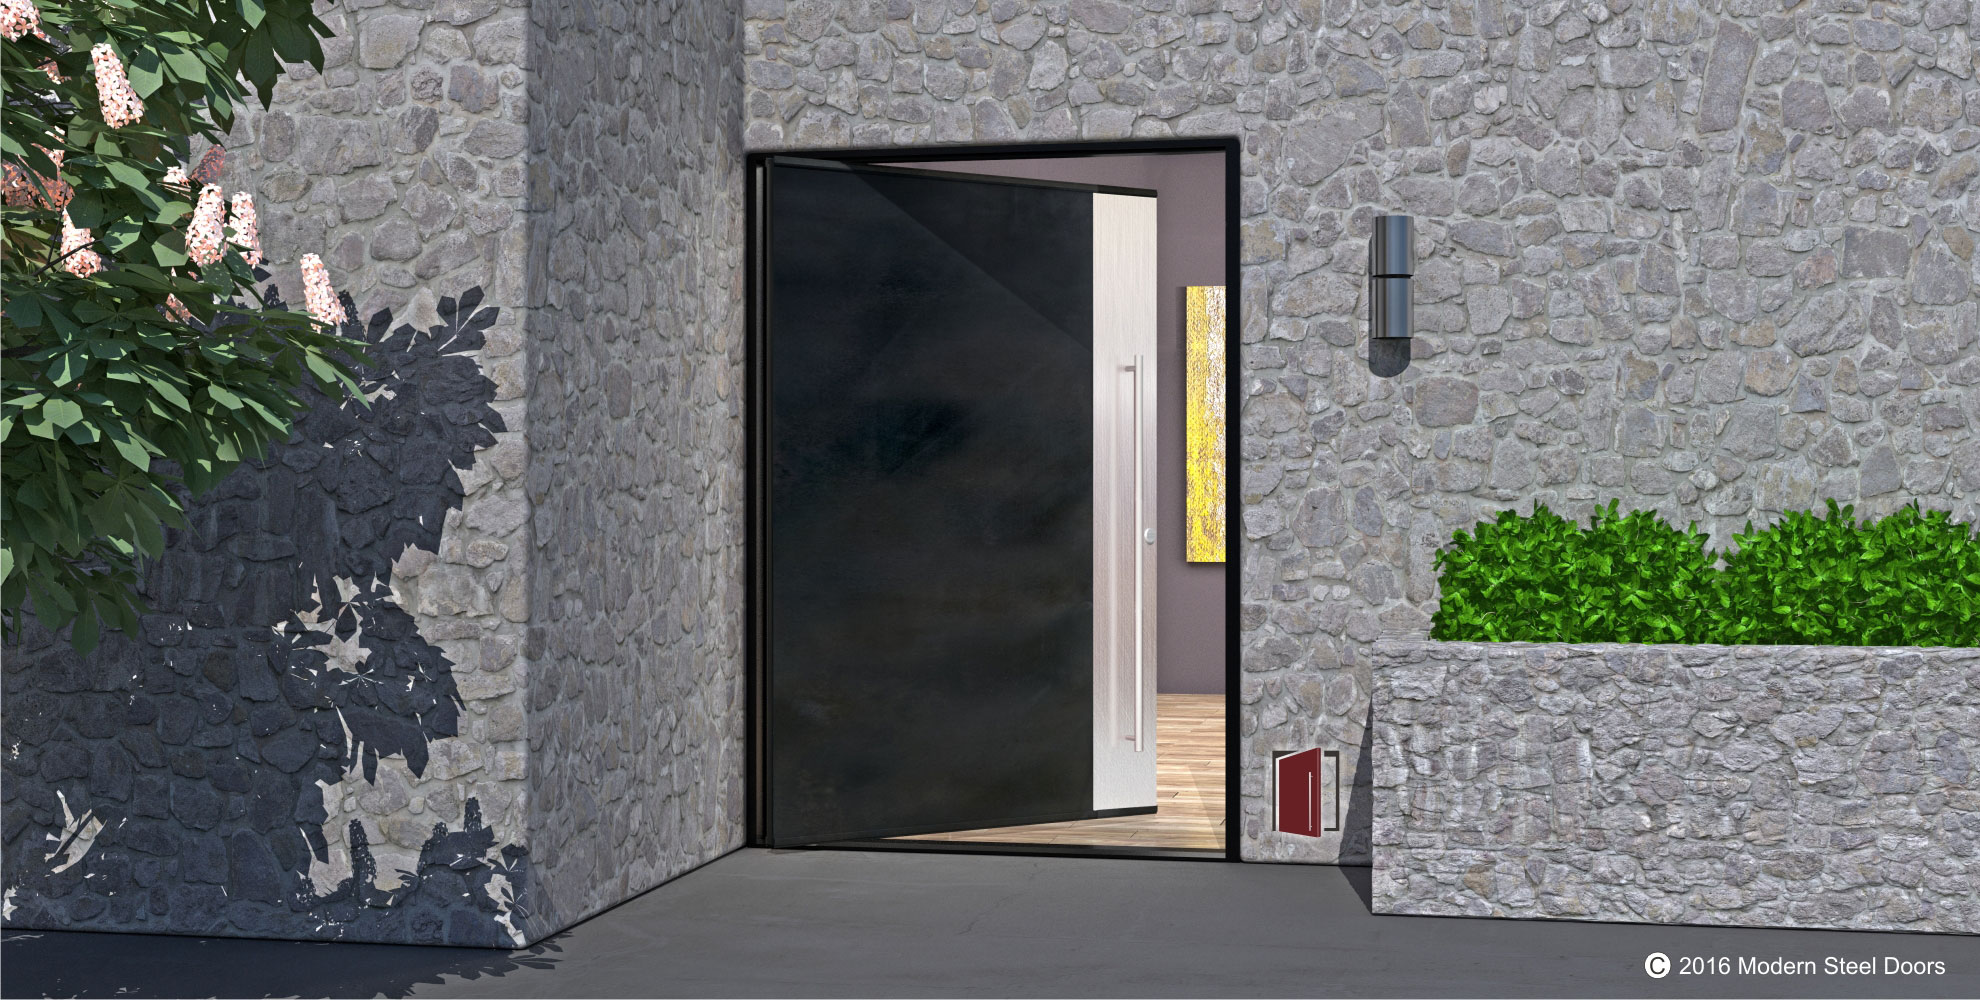 modern steel entry door made of blackened stainless steel and brushed stainless vertical accent panel with stainless round hardware